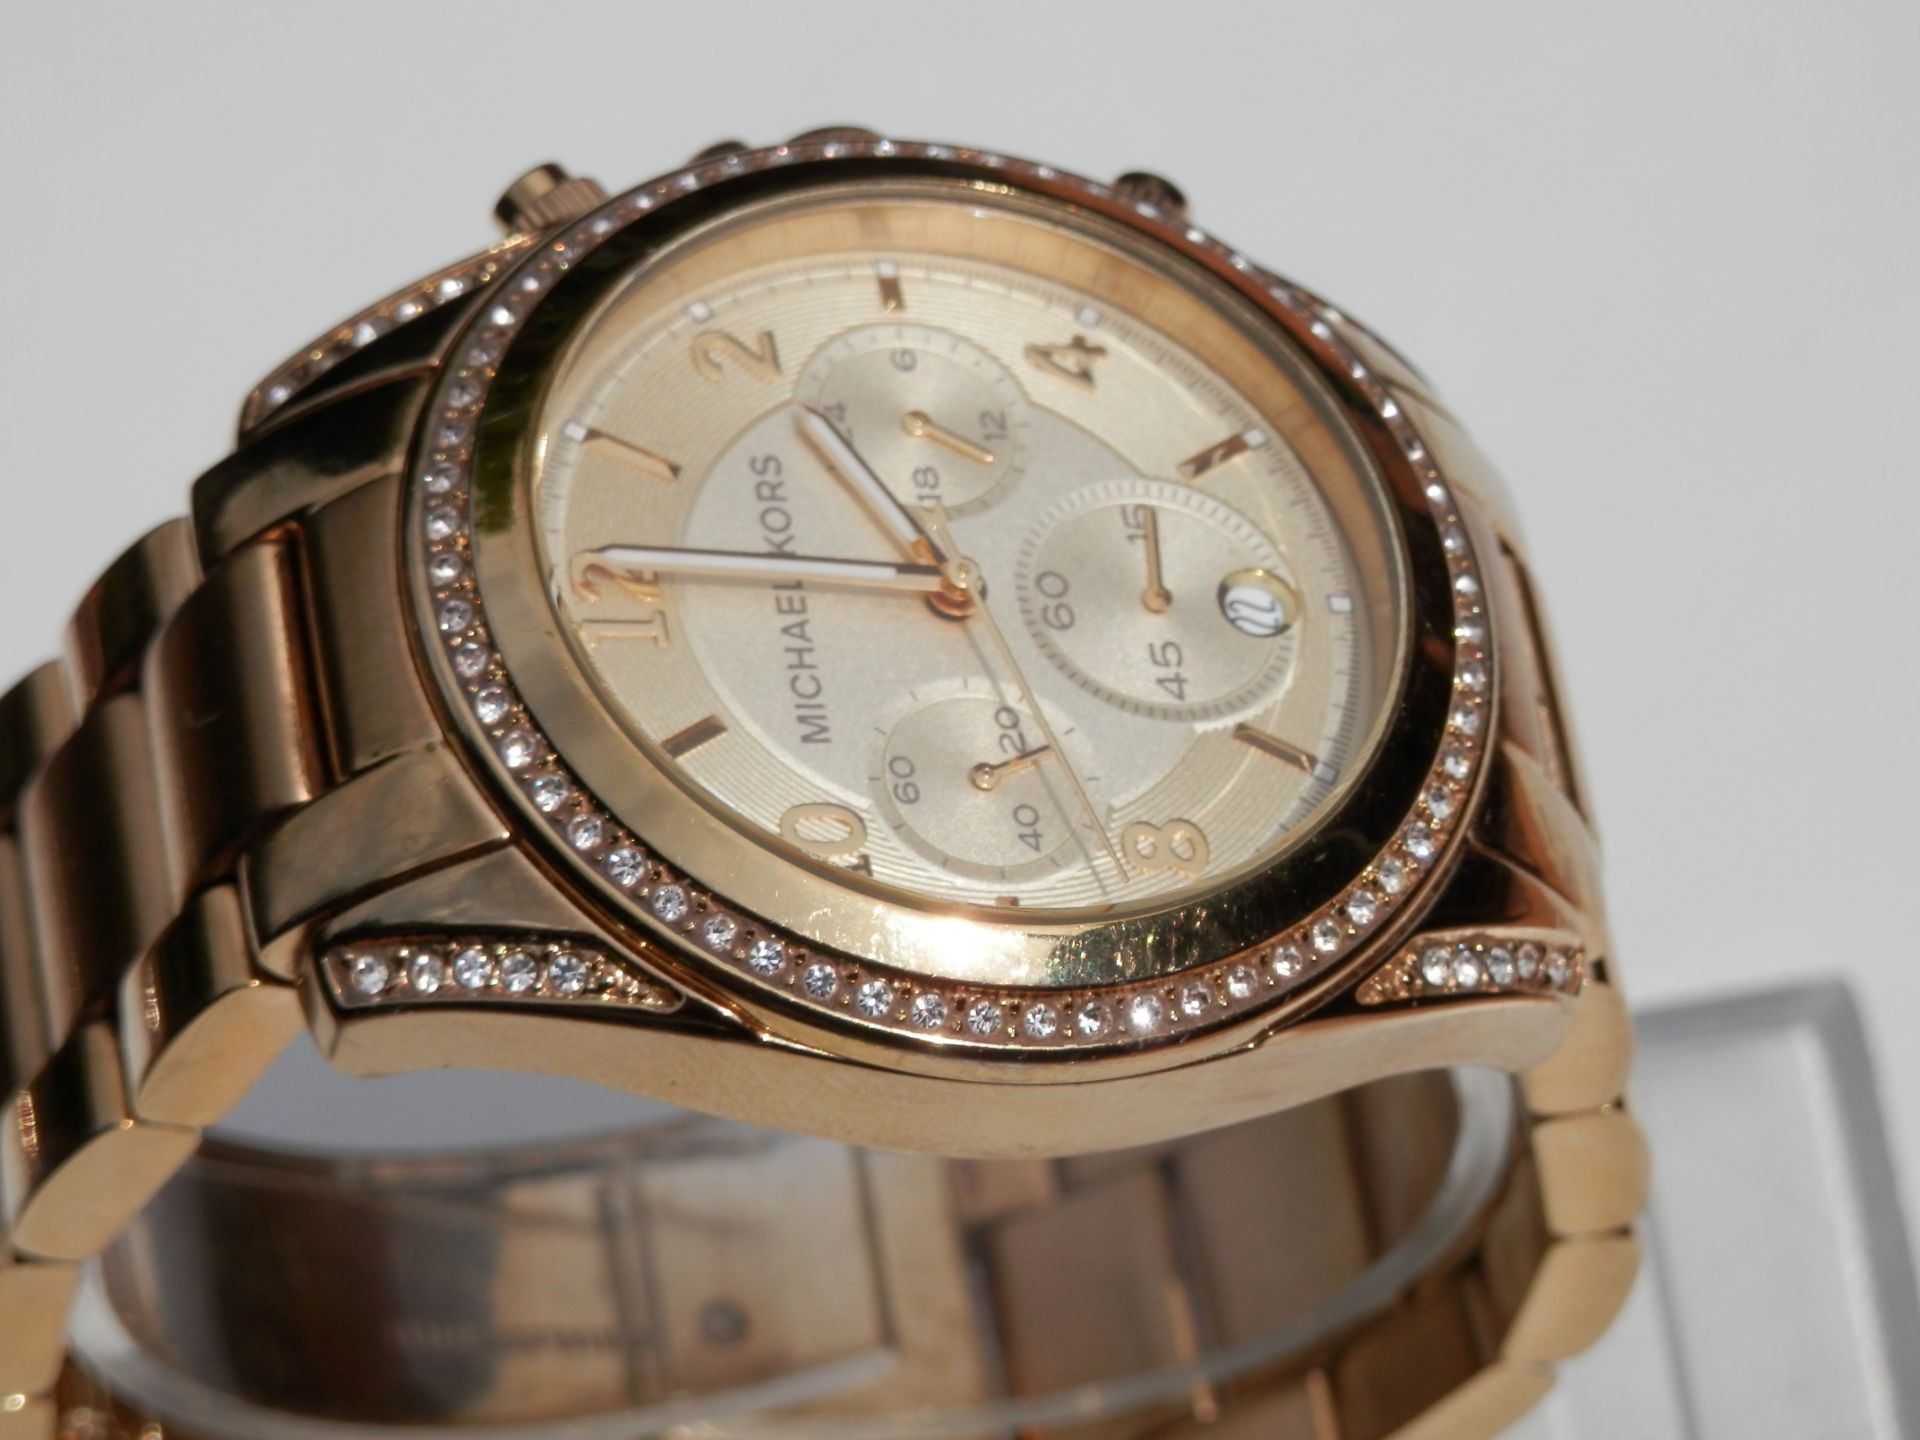 RRP £240. SUPERB LADIES MICHAEL KORS FULL STAINLESS GOLD PLATED DIAMANTE ENCRUSTED CHRONO DATE WATCH - Image 13 of 16